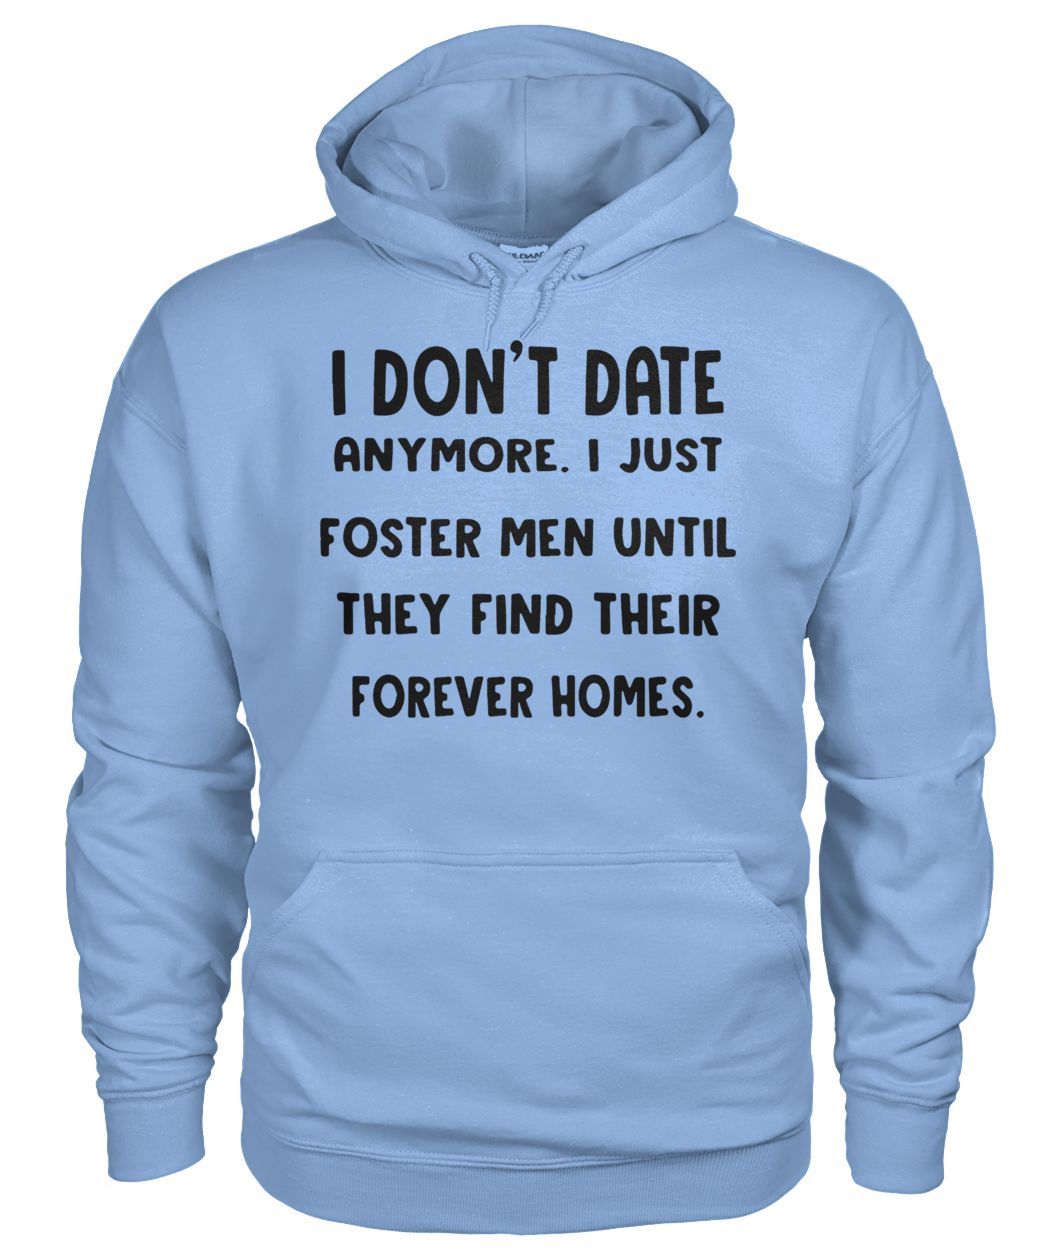 I don’t date anymore I just foster men until they find their forever homes gildan hoodie